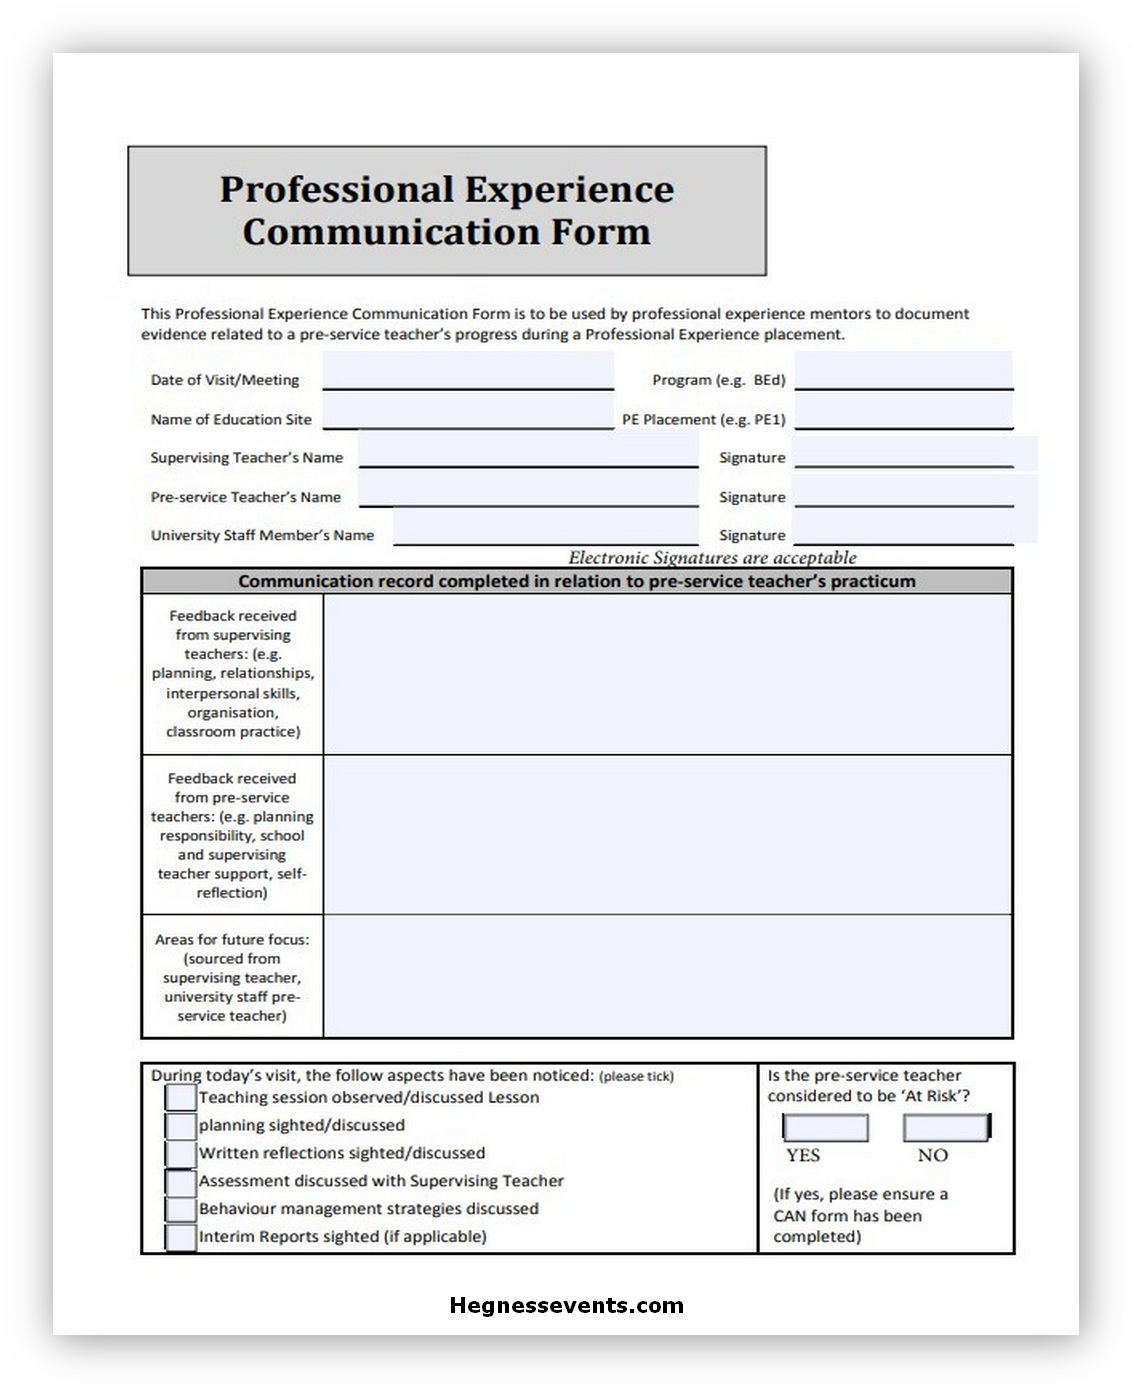 Professional Experience Communication Form